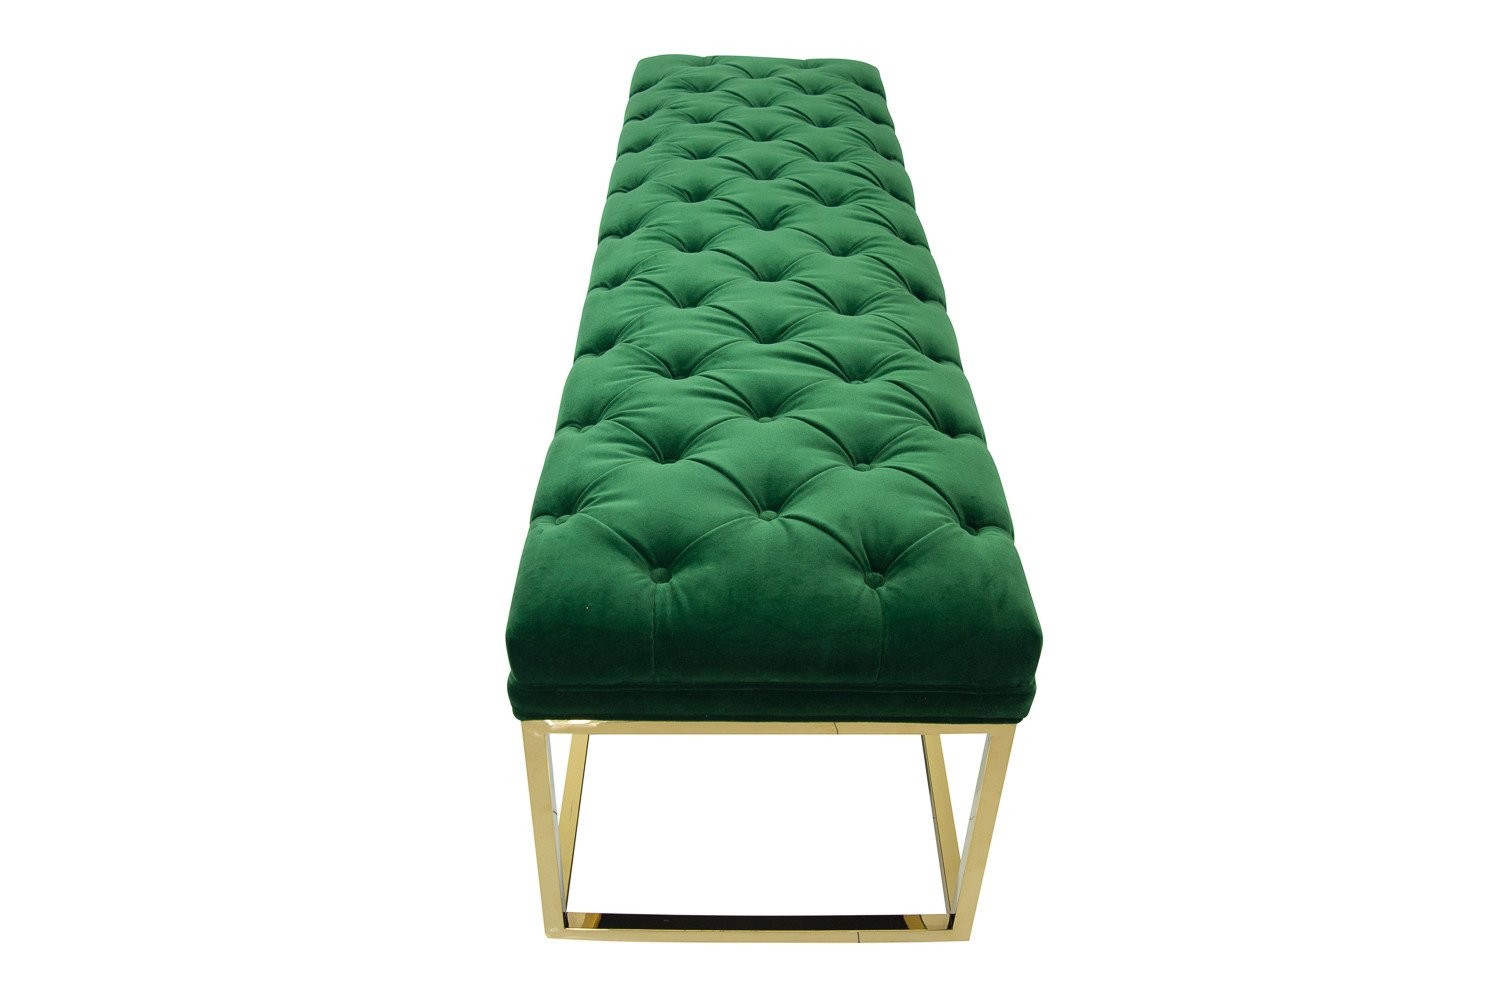 Quality HOT sale modern classic green velvet fabric tufted upholstery bench stainless steel frame ottoman for wedding event wholesale